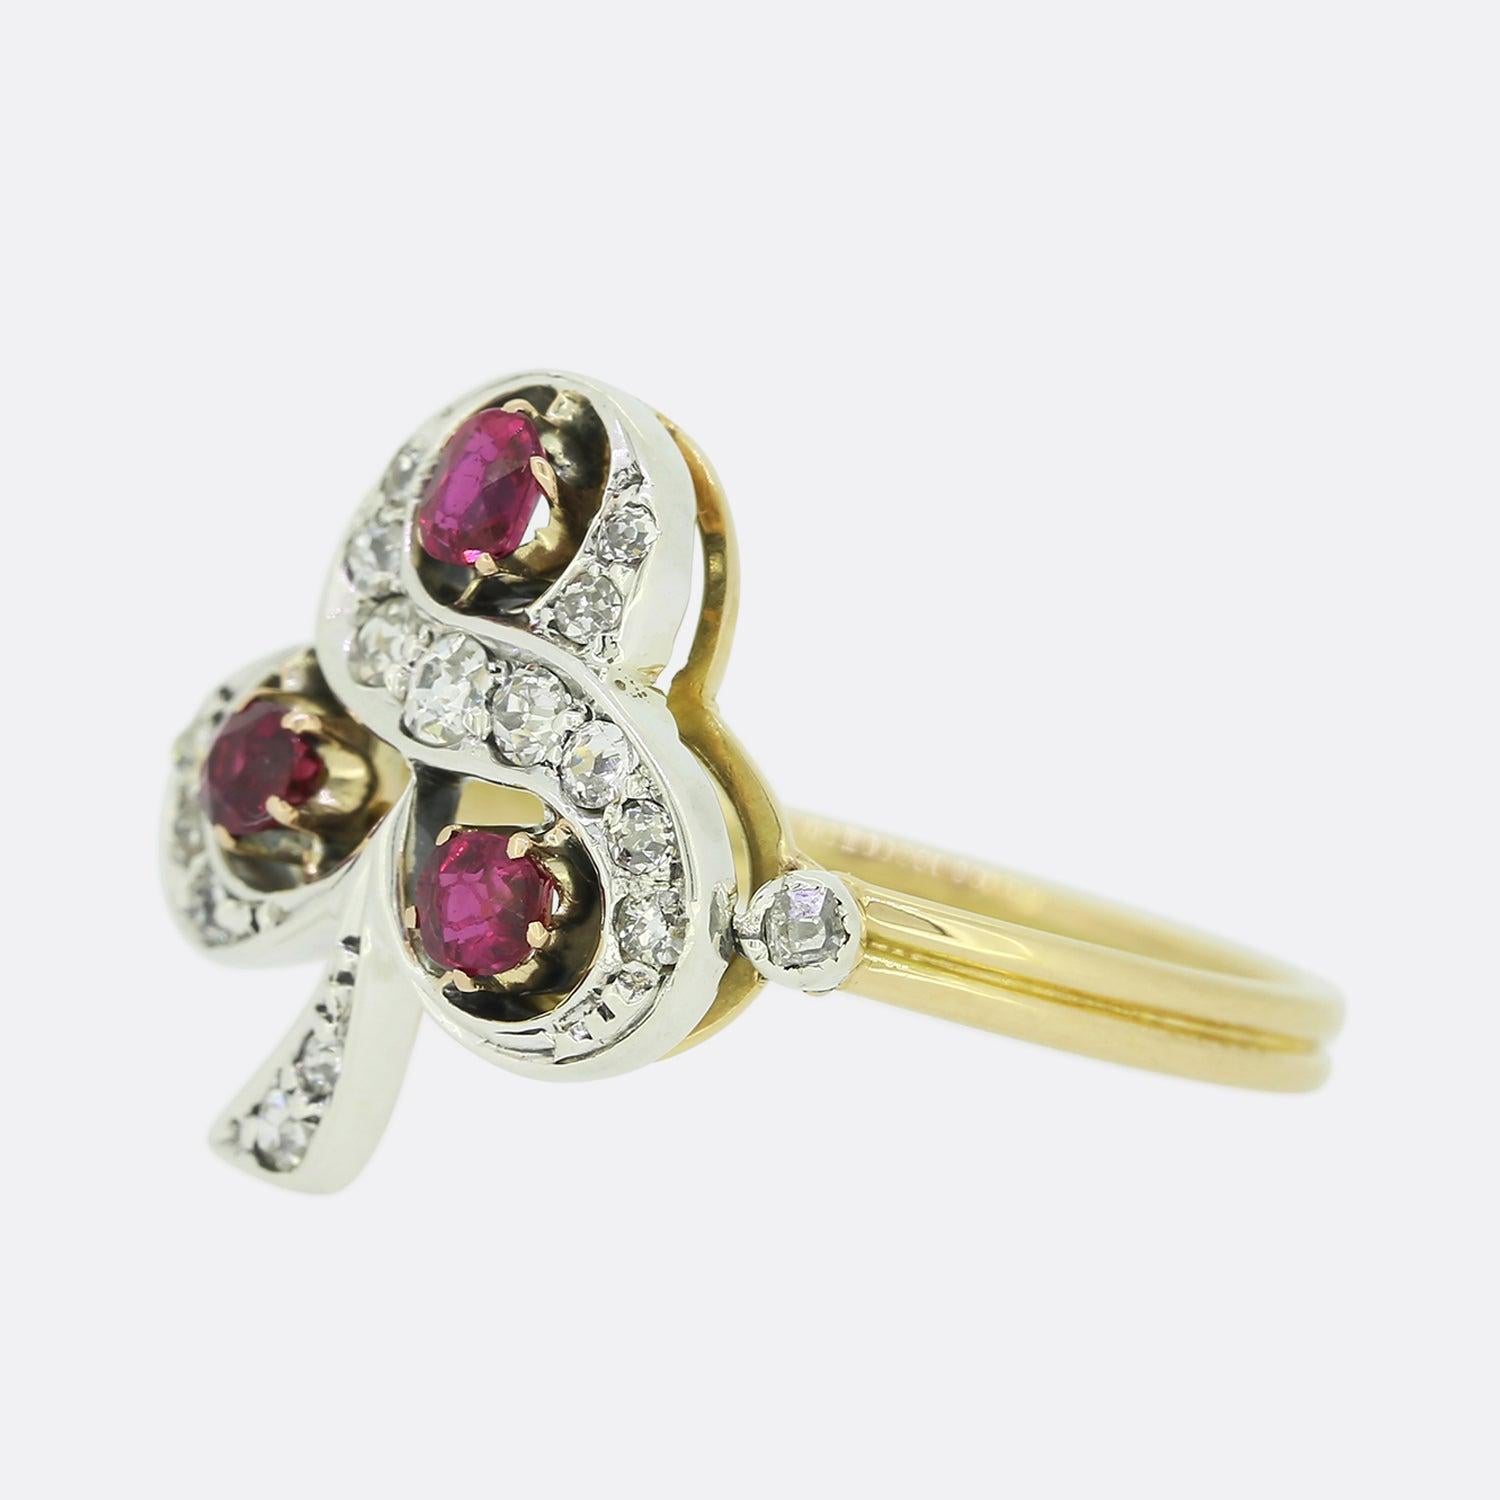 This is a charming 18ct yellow gold ruby and diamond clover ring. The ring is set with a trio of round and oval shaped rubies within an open detailed design. Crafted in platinum, the ring's clover structured face features a vast array of old cut